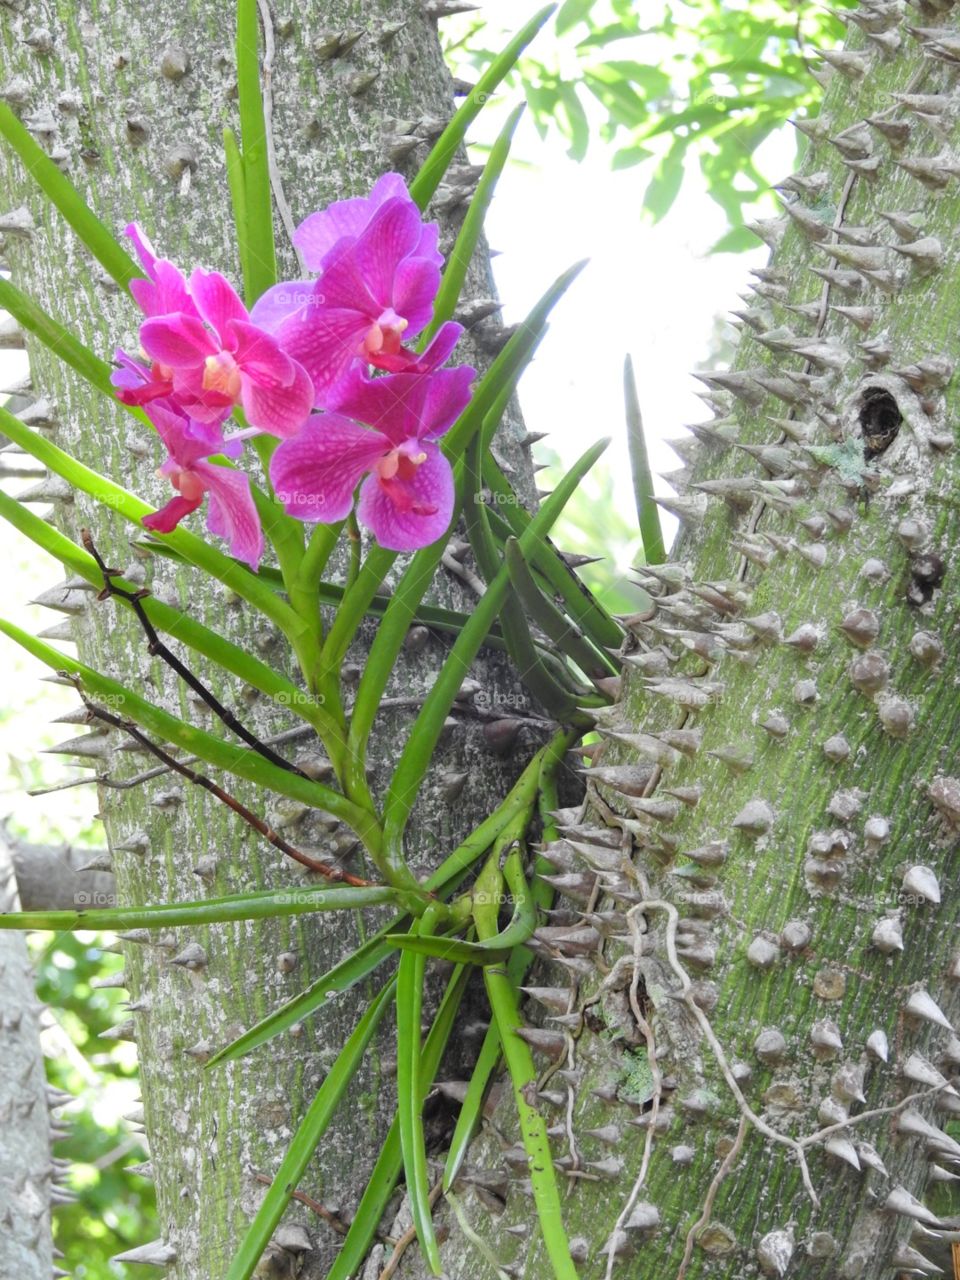 The orchid and the thorn